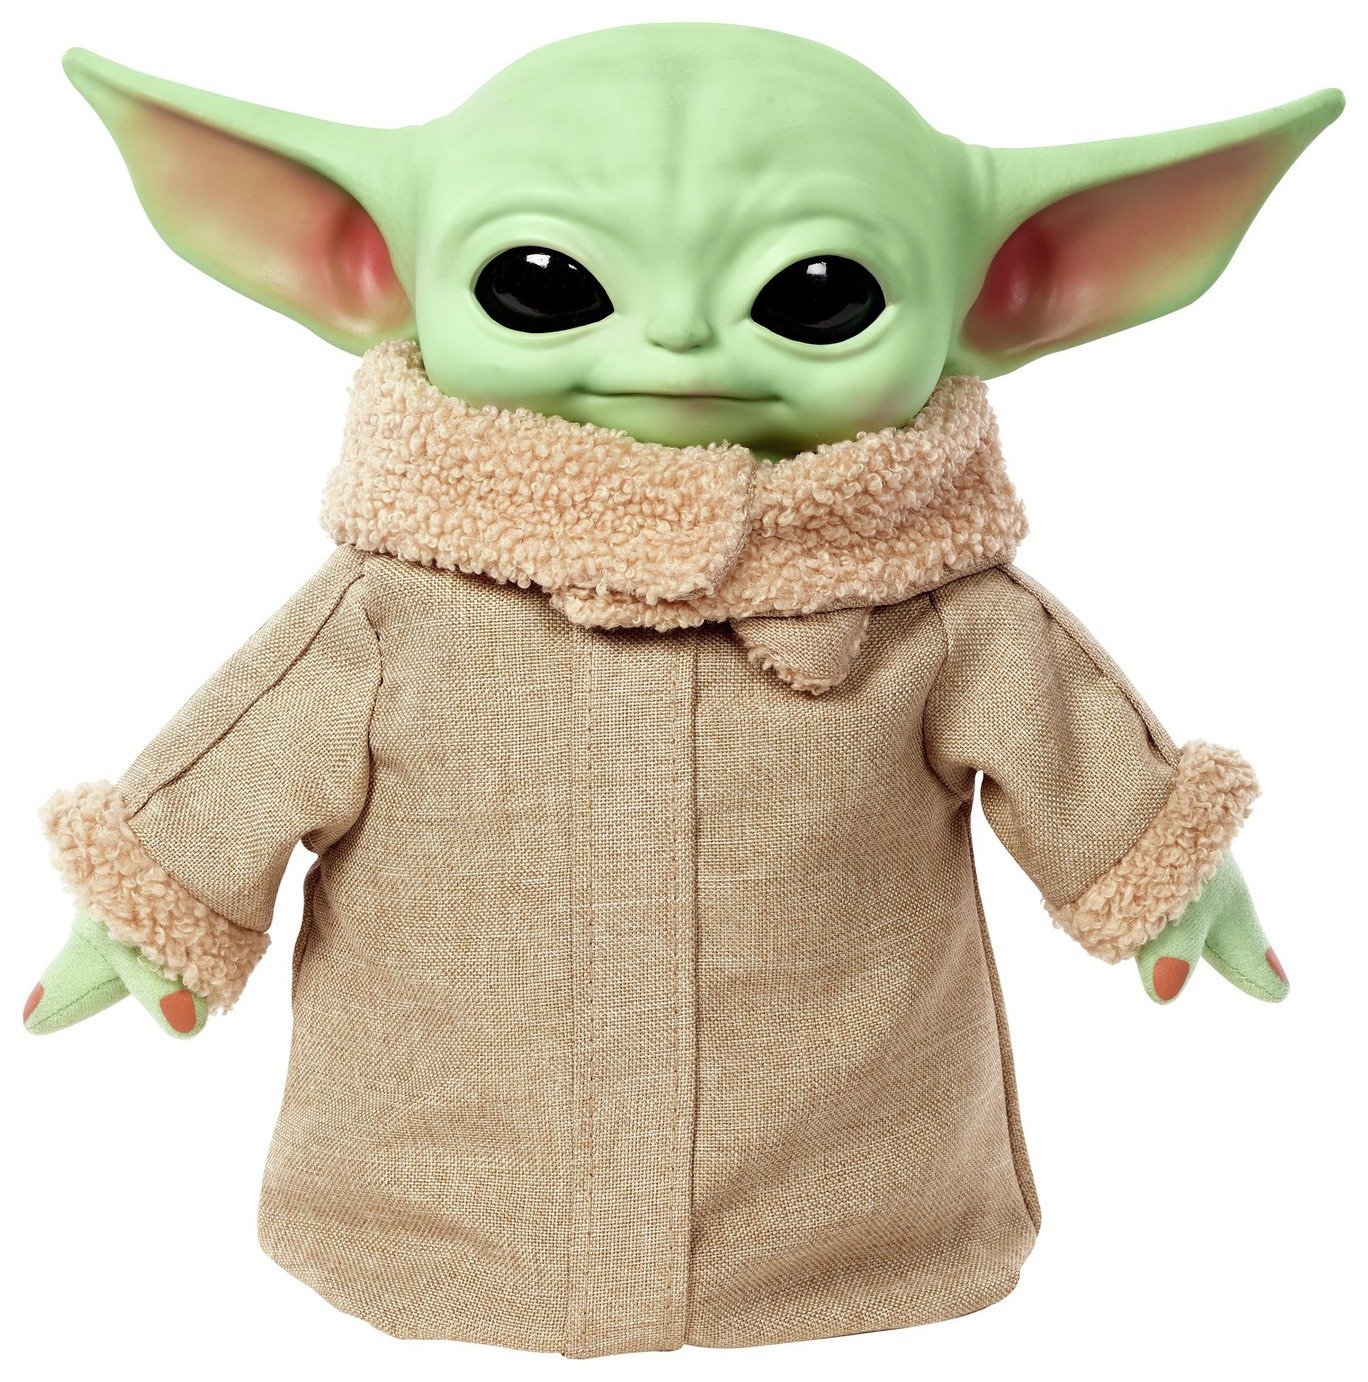 Star Wars Squeeze & Blink Grogu Feature Plush review